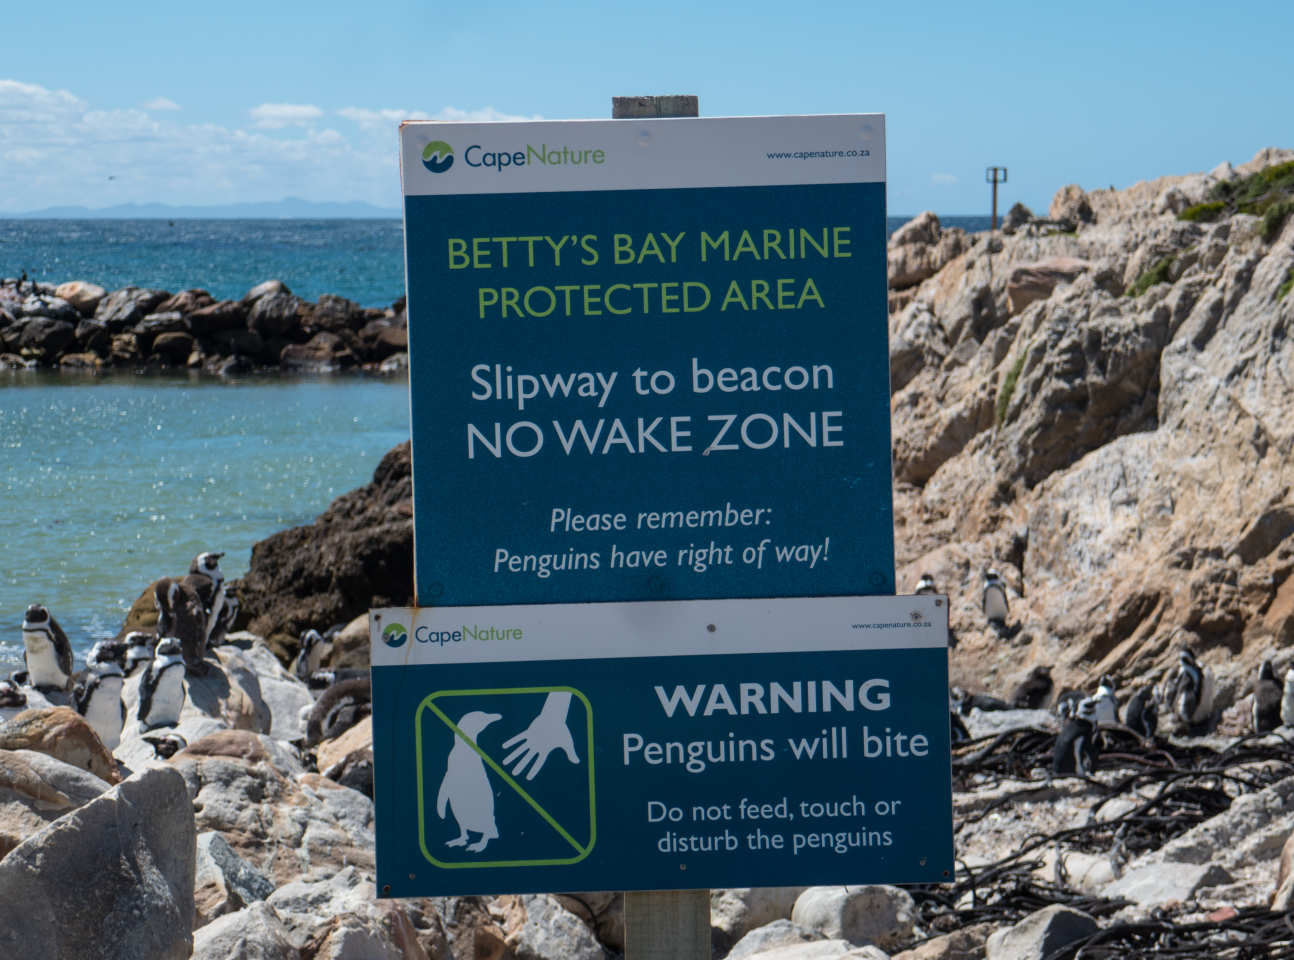 A sign for a marine protected area (with a warning that penguins will bite)